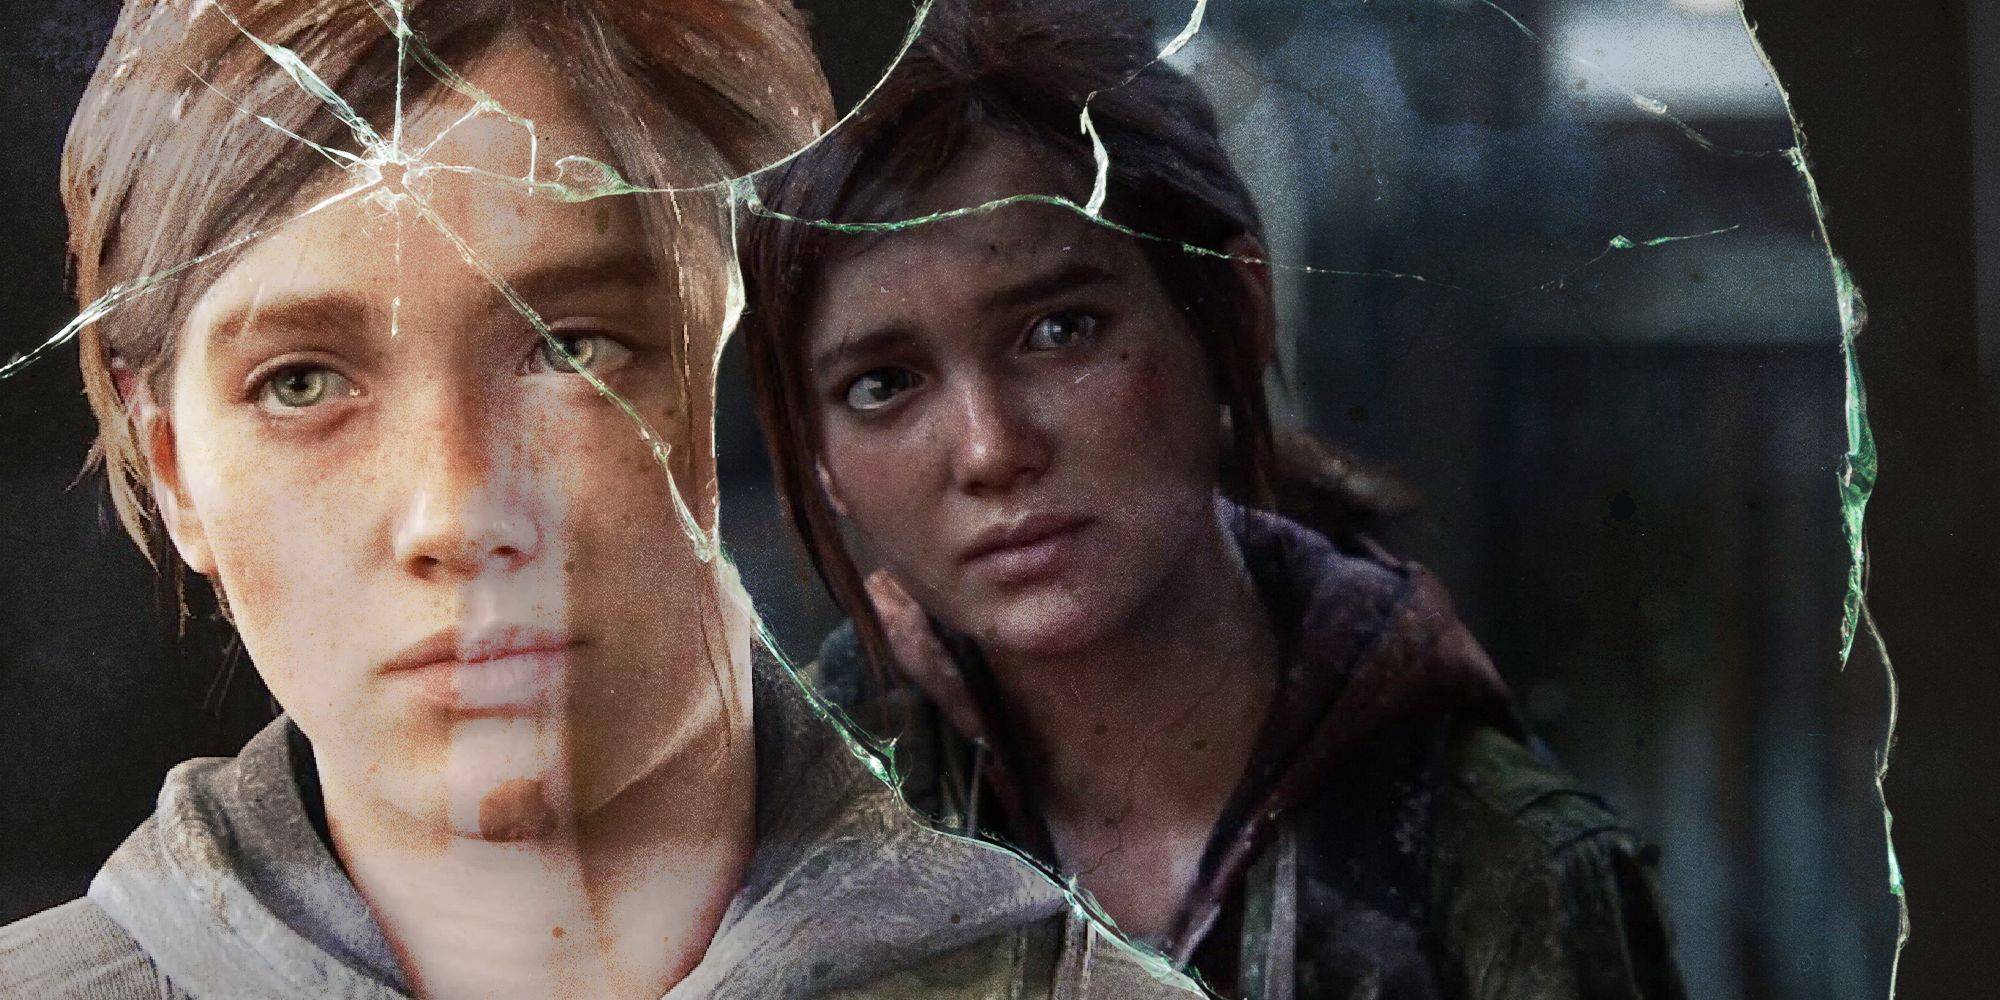 Ellie in TLOU2 and Ellie in TLOU with shattered glass over the image.